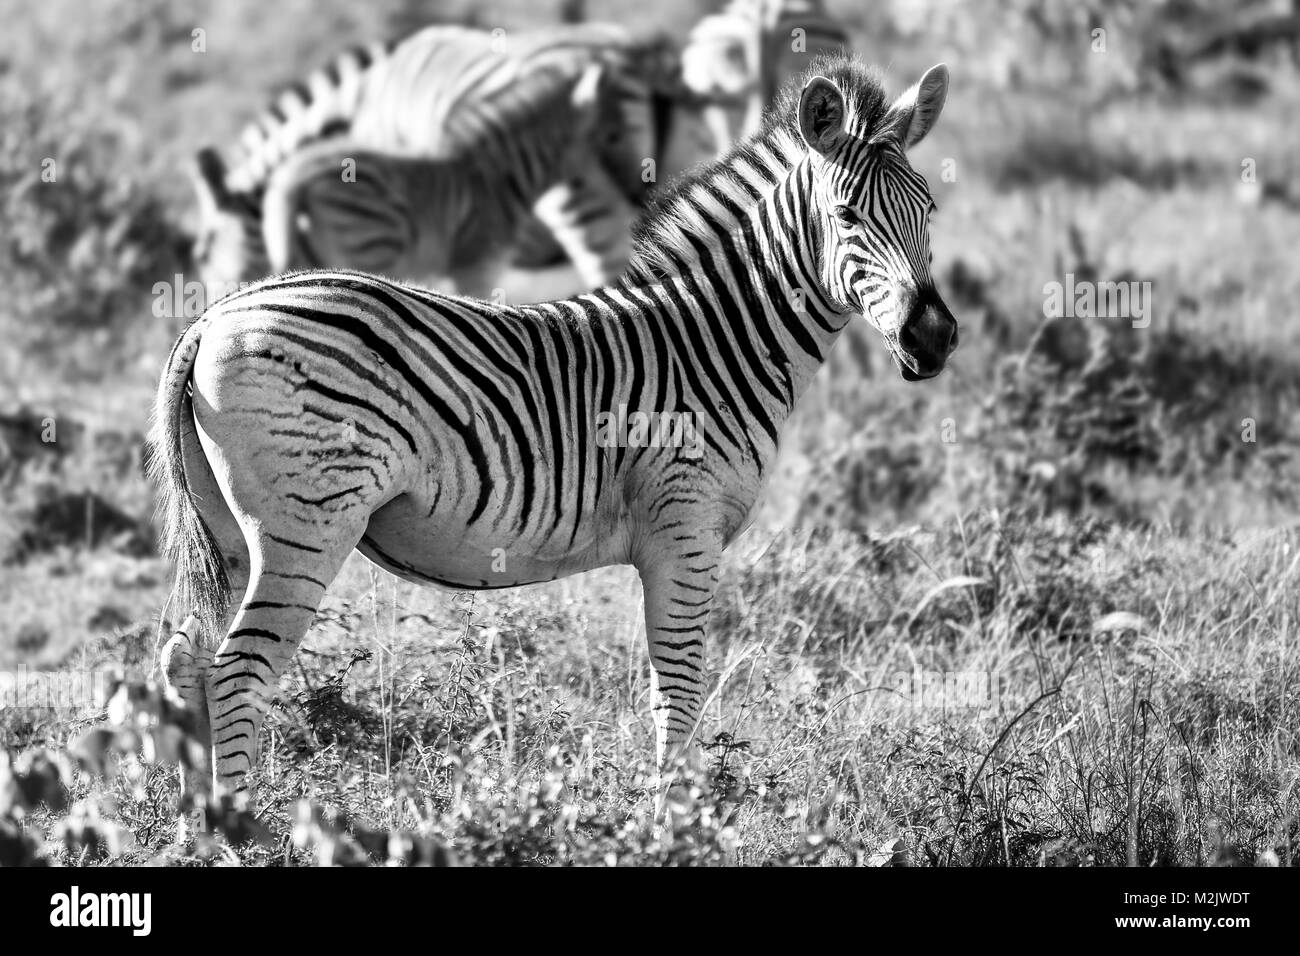 Black and white study of Zebra in grasslands - Mkuse Falls Private Game Reserve, KZN - South Africa Stock Photo